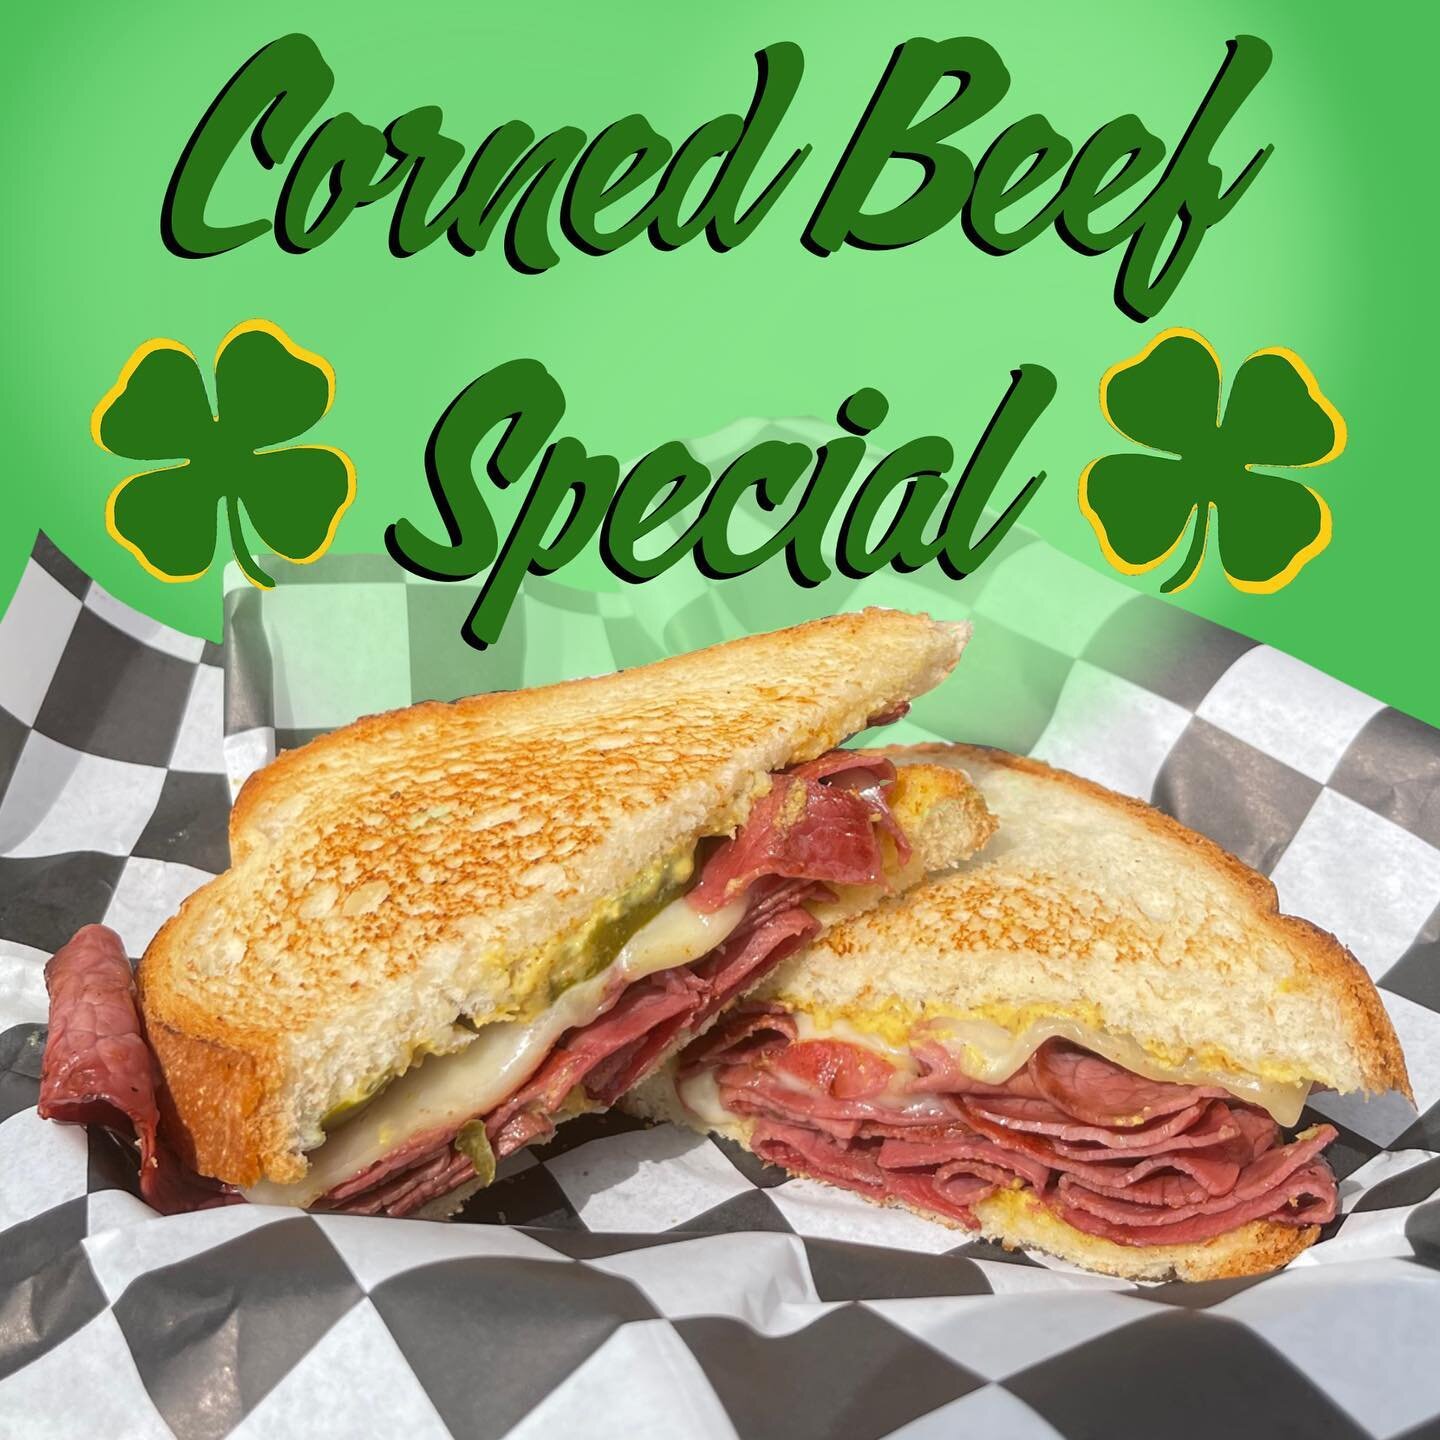 ☘️🌈 Wanna get lucky?? 🌈☘️Come try our corned beef special! Pile of corned beef with melty provolone, pickles, and spicy mustard grilled on white bread. 🤤